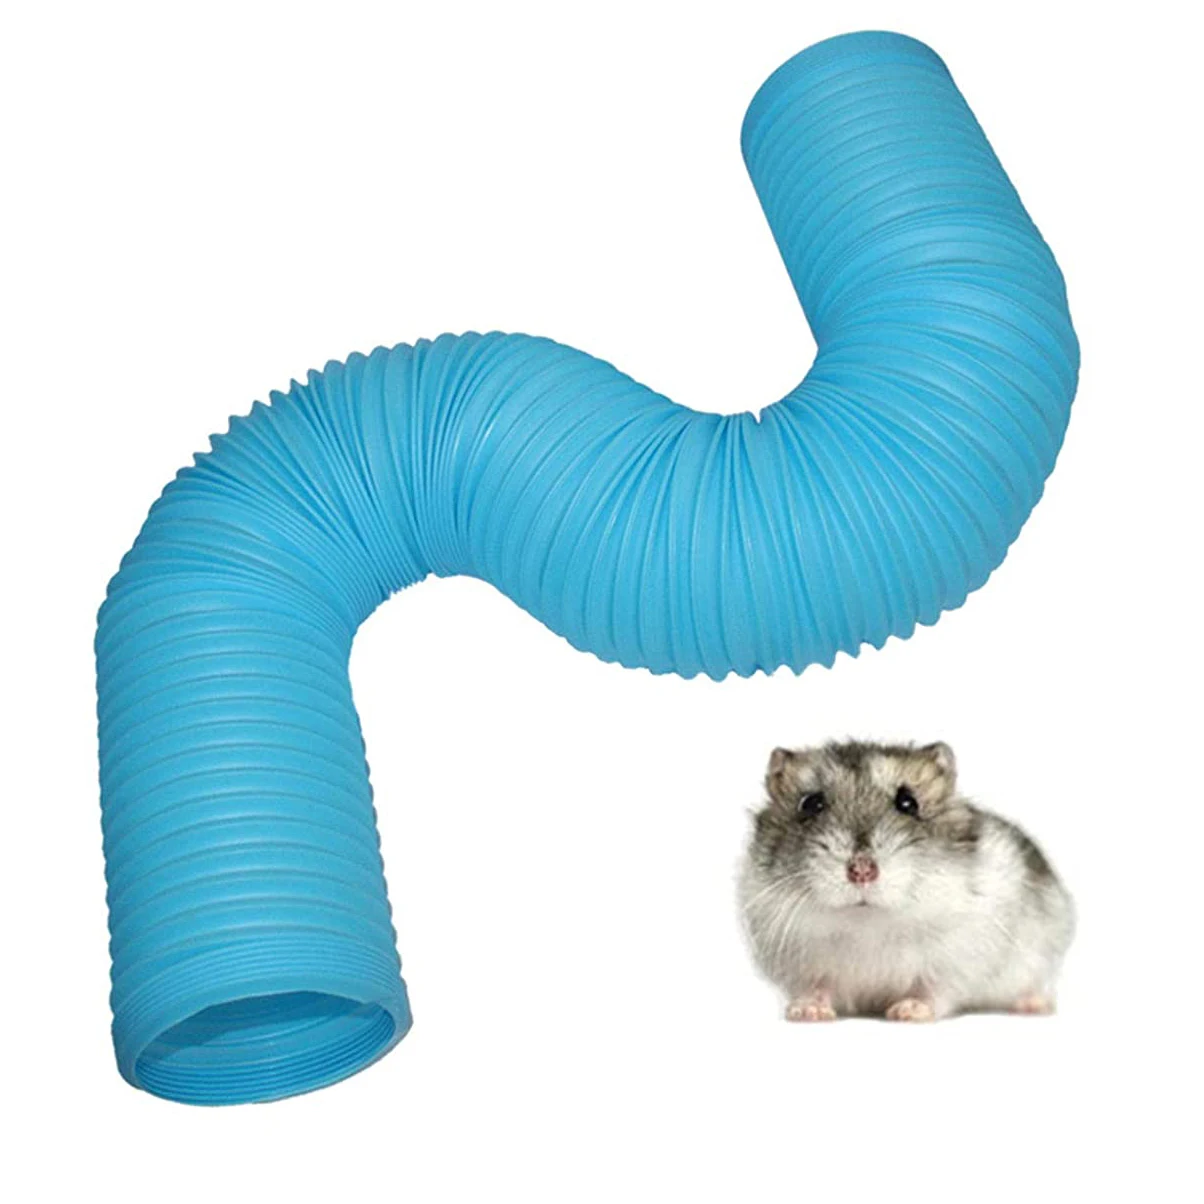 Gerbil Squirrel Tubes Blue Hamster Fun Tunnel Pet Plastic Tube Toy Small Animal Foldable Exercising Training Hideout Tunnels Tunnel for Hedgehog Funny Toy Hamster 